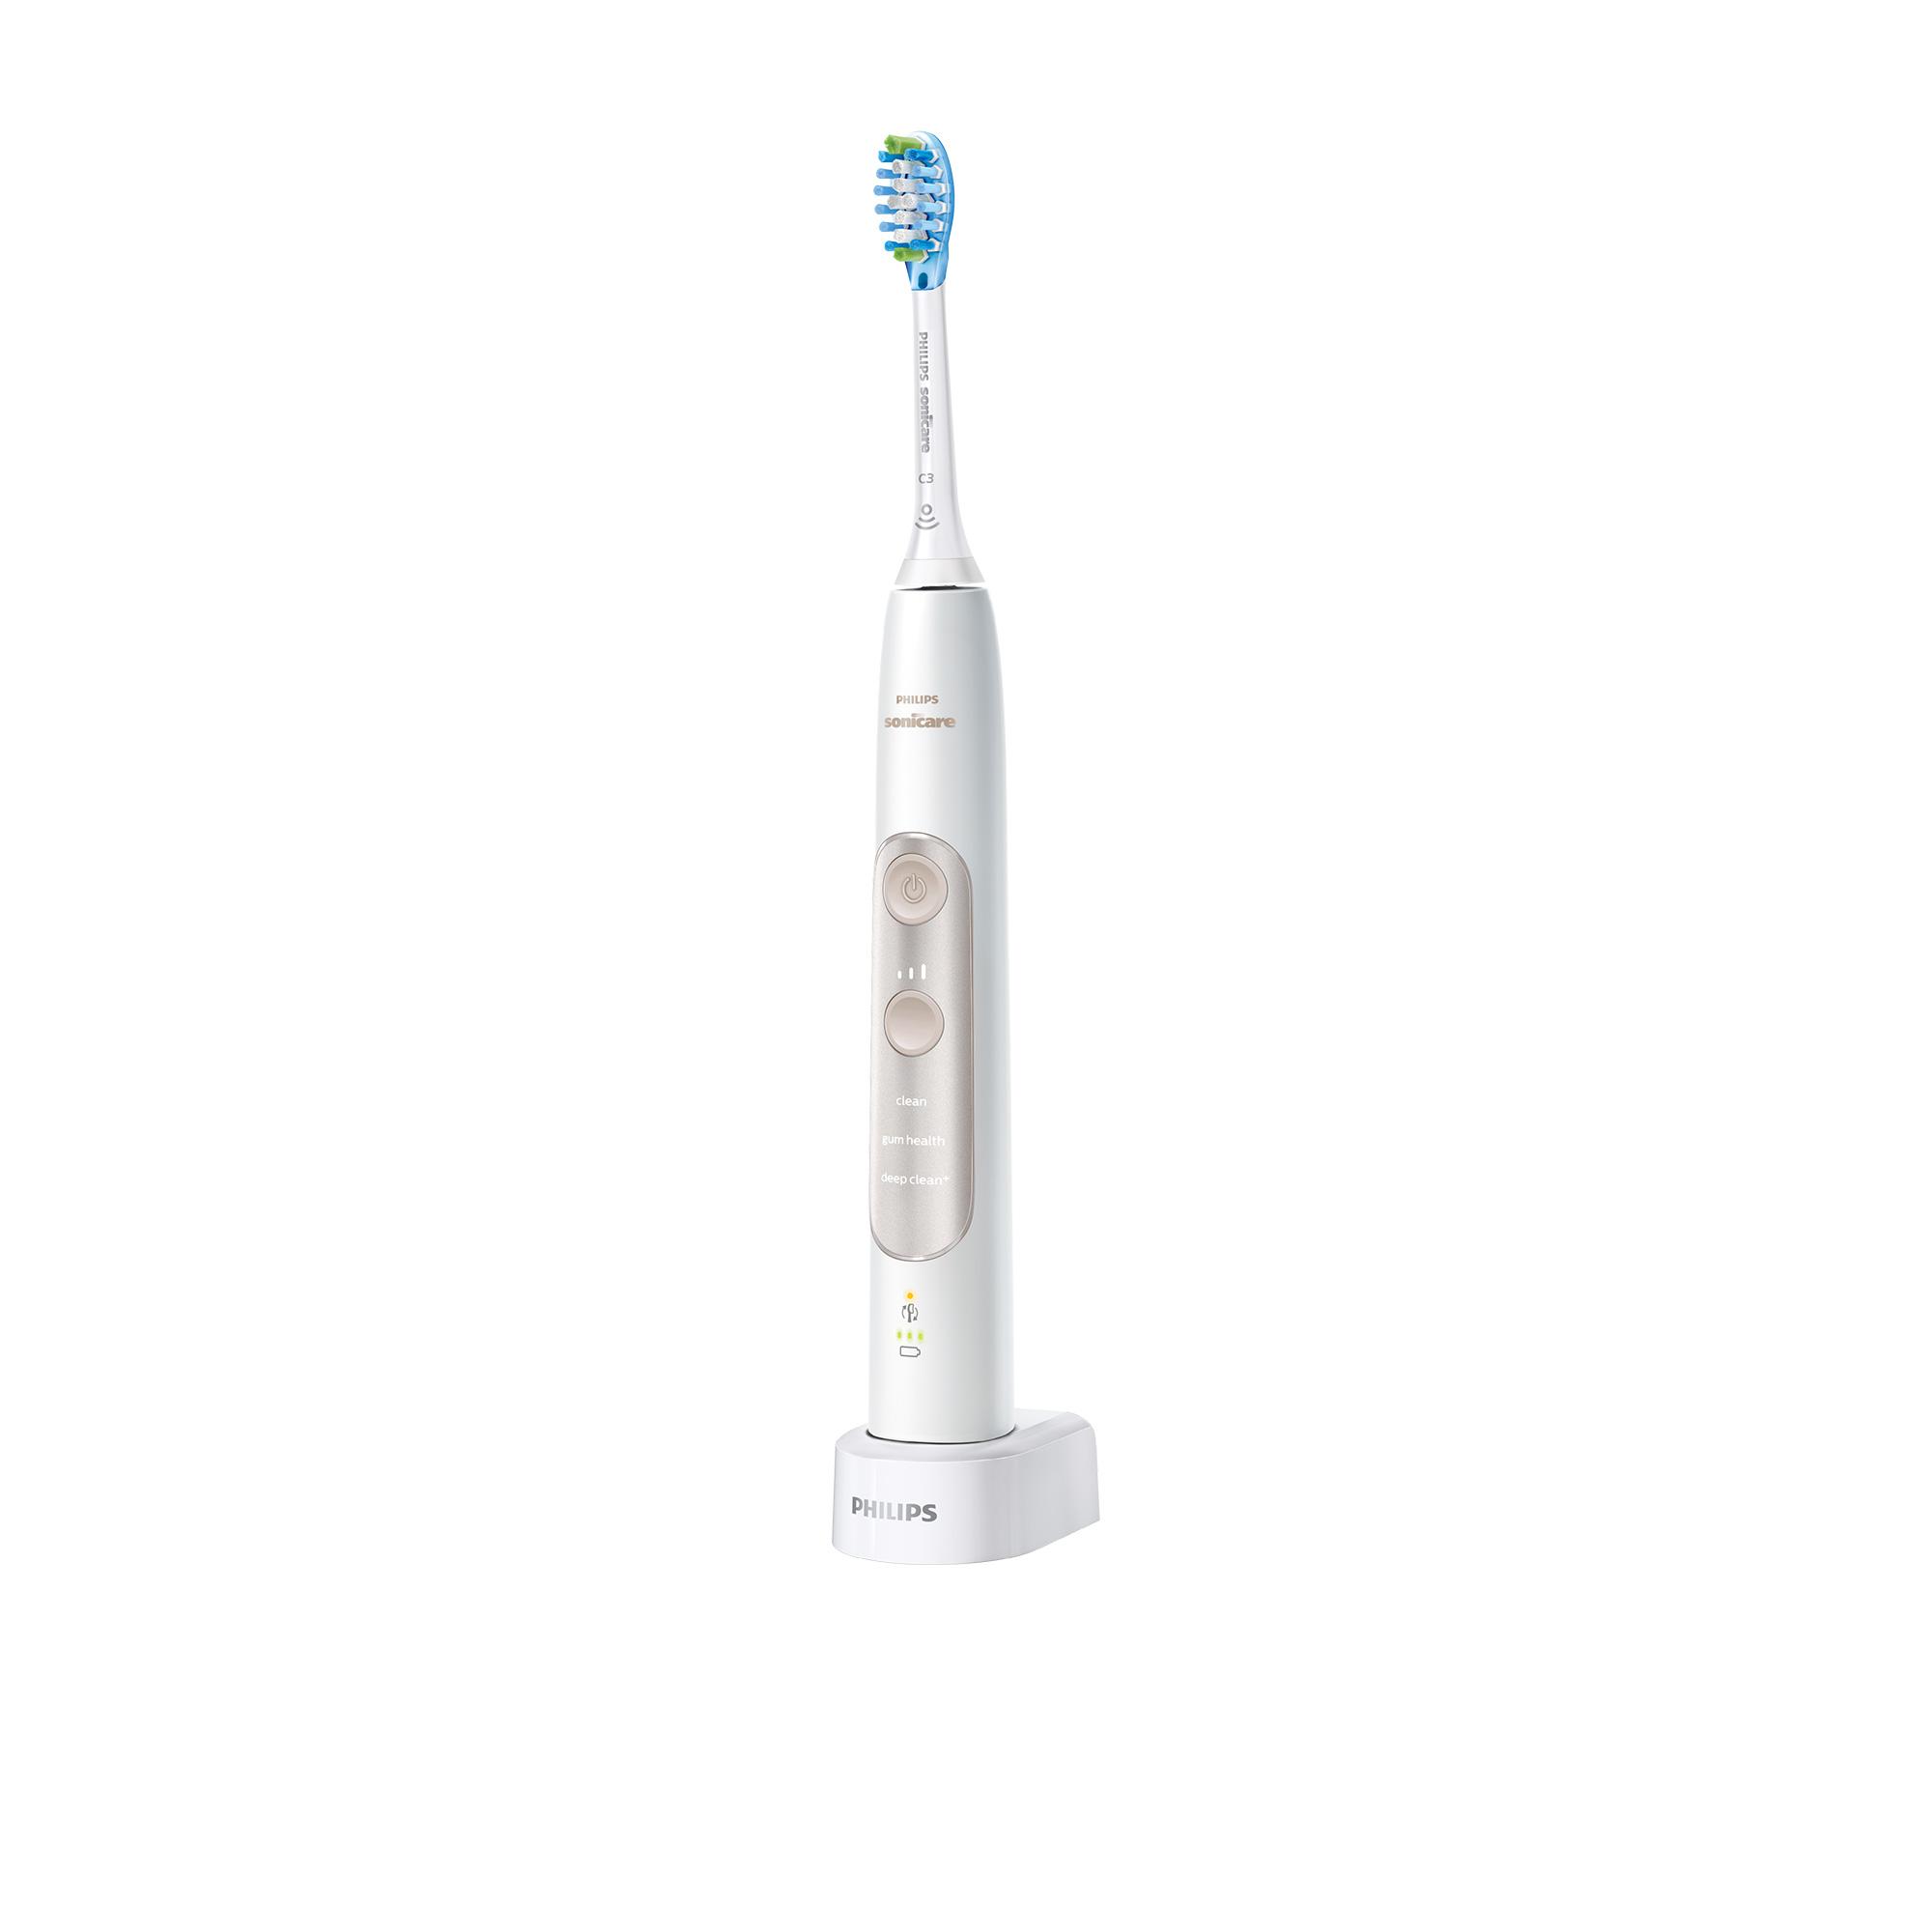 Philips Sonicare 7300 ExpertClean Electric Toothbrush Gold Image 4